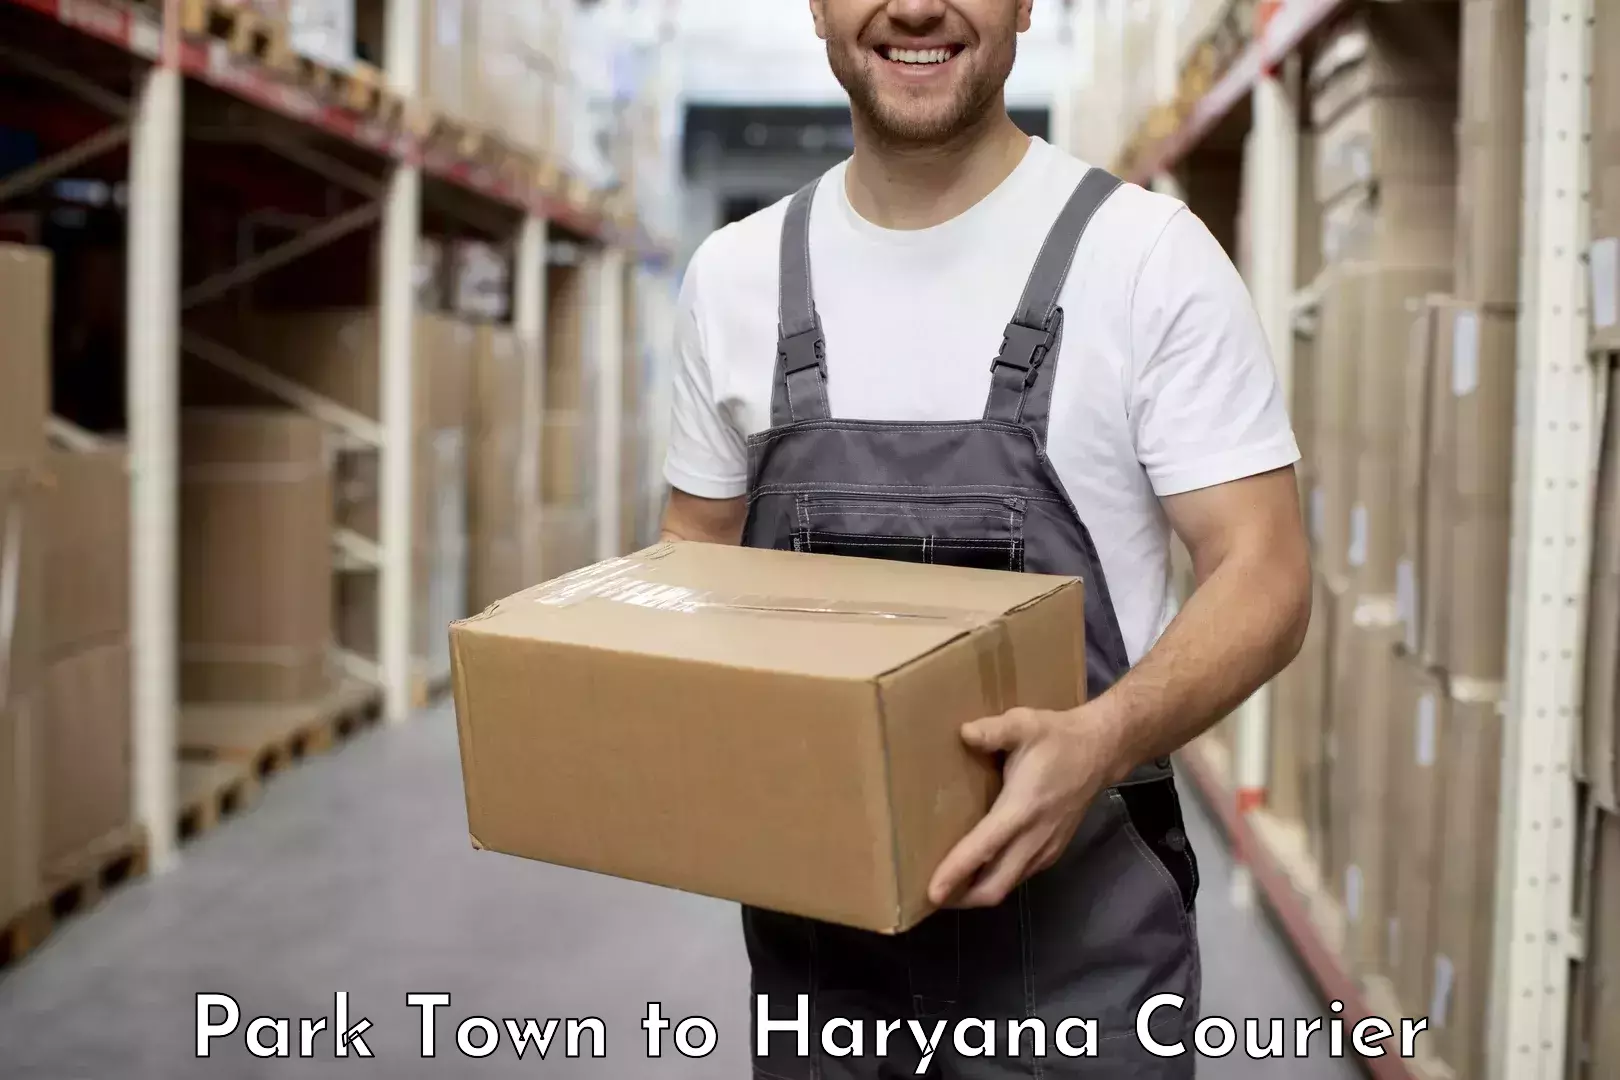 On-demand courier Park Town to Narwana